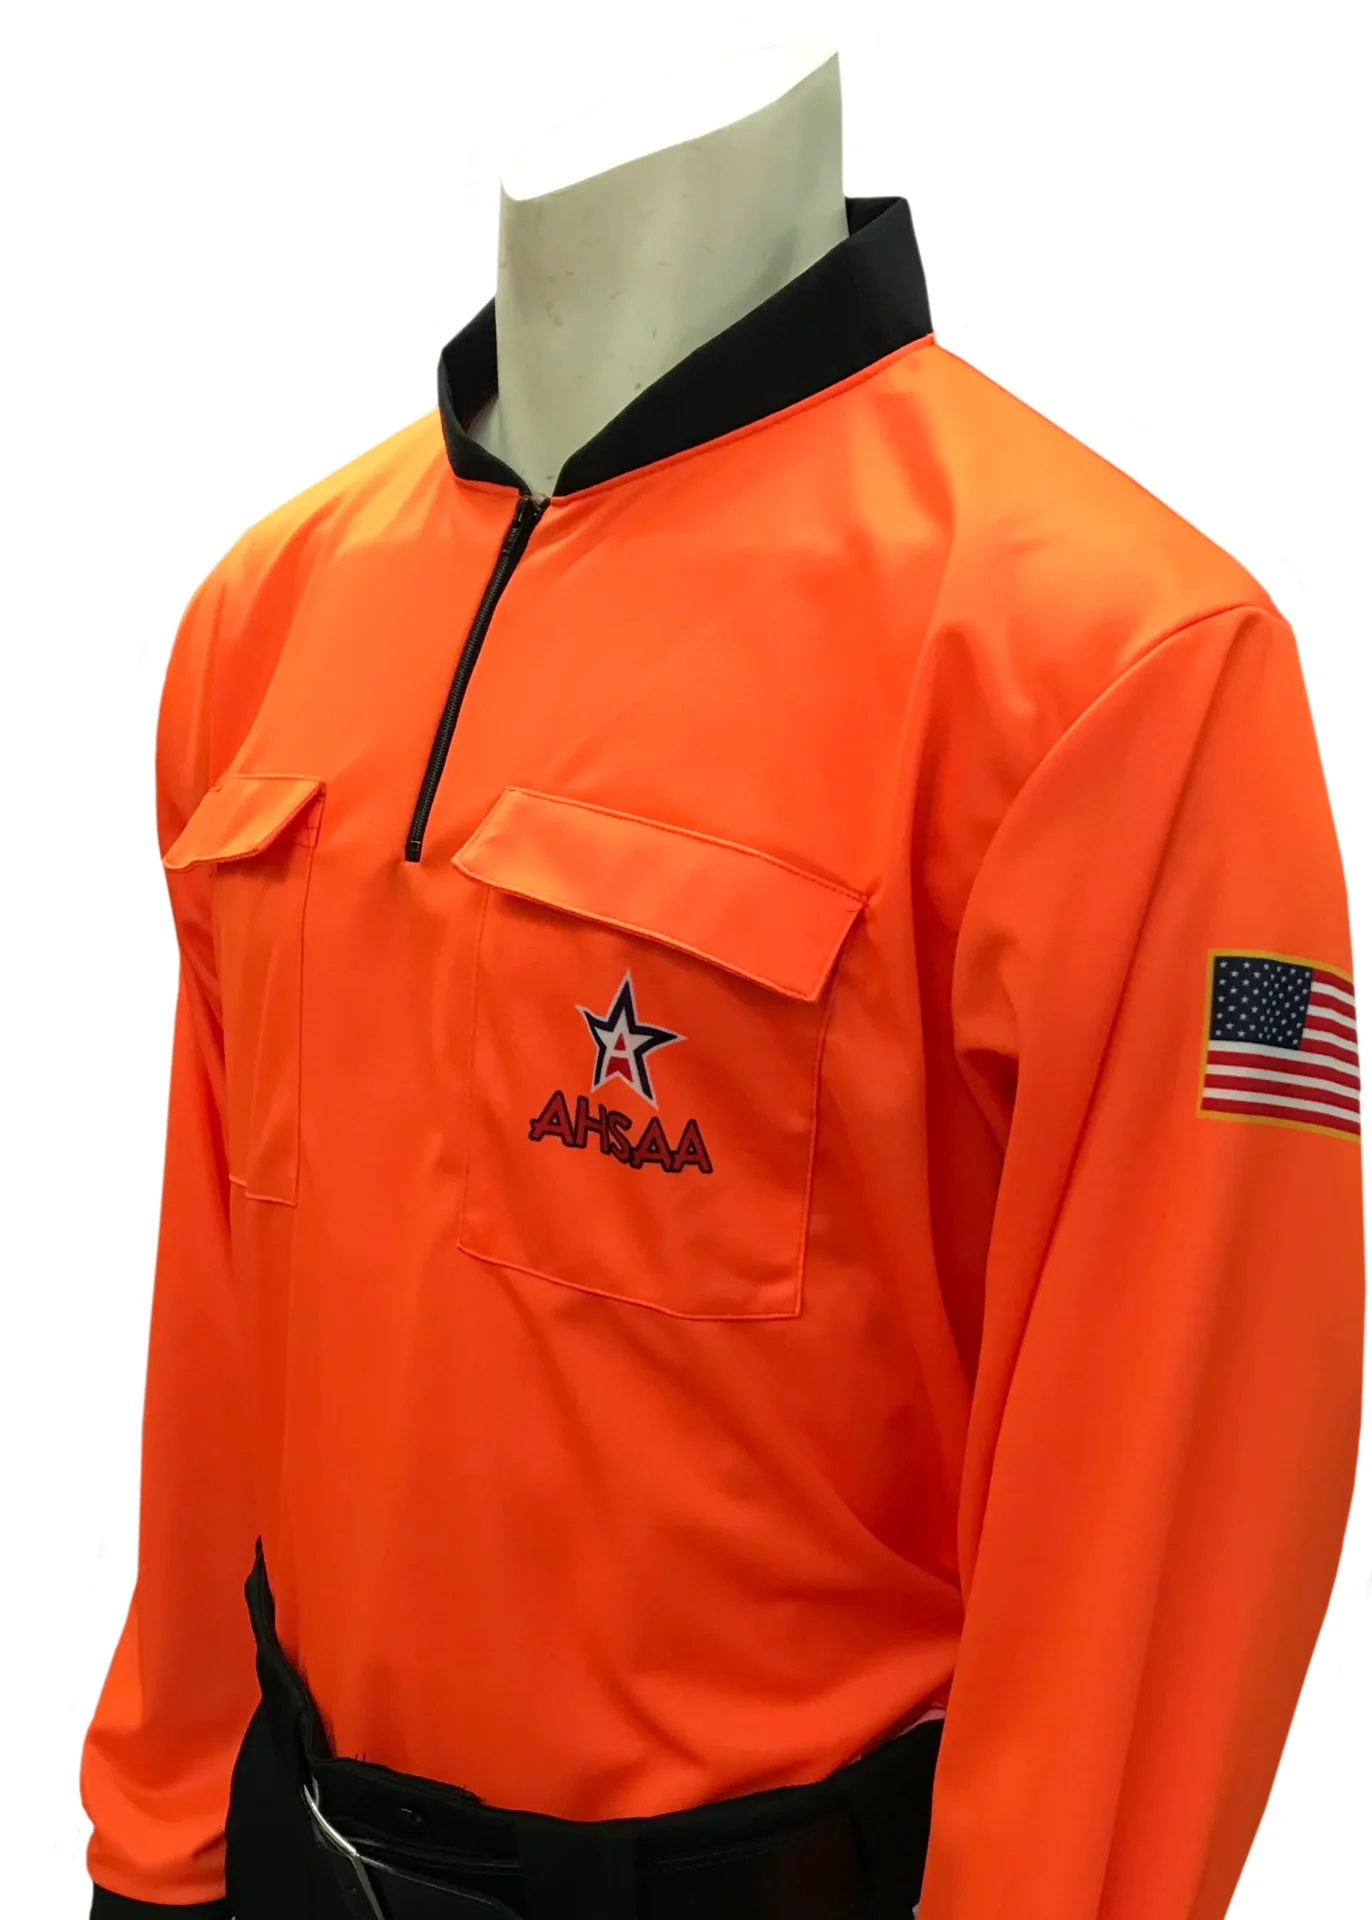 An orange jacket with a black collar and sleeves.